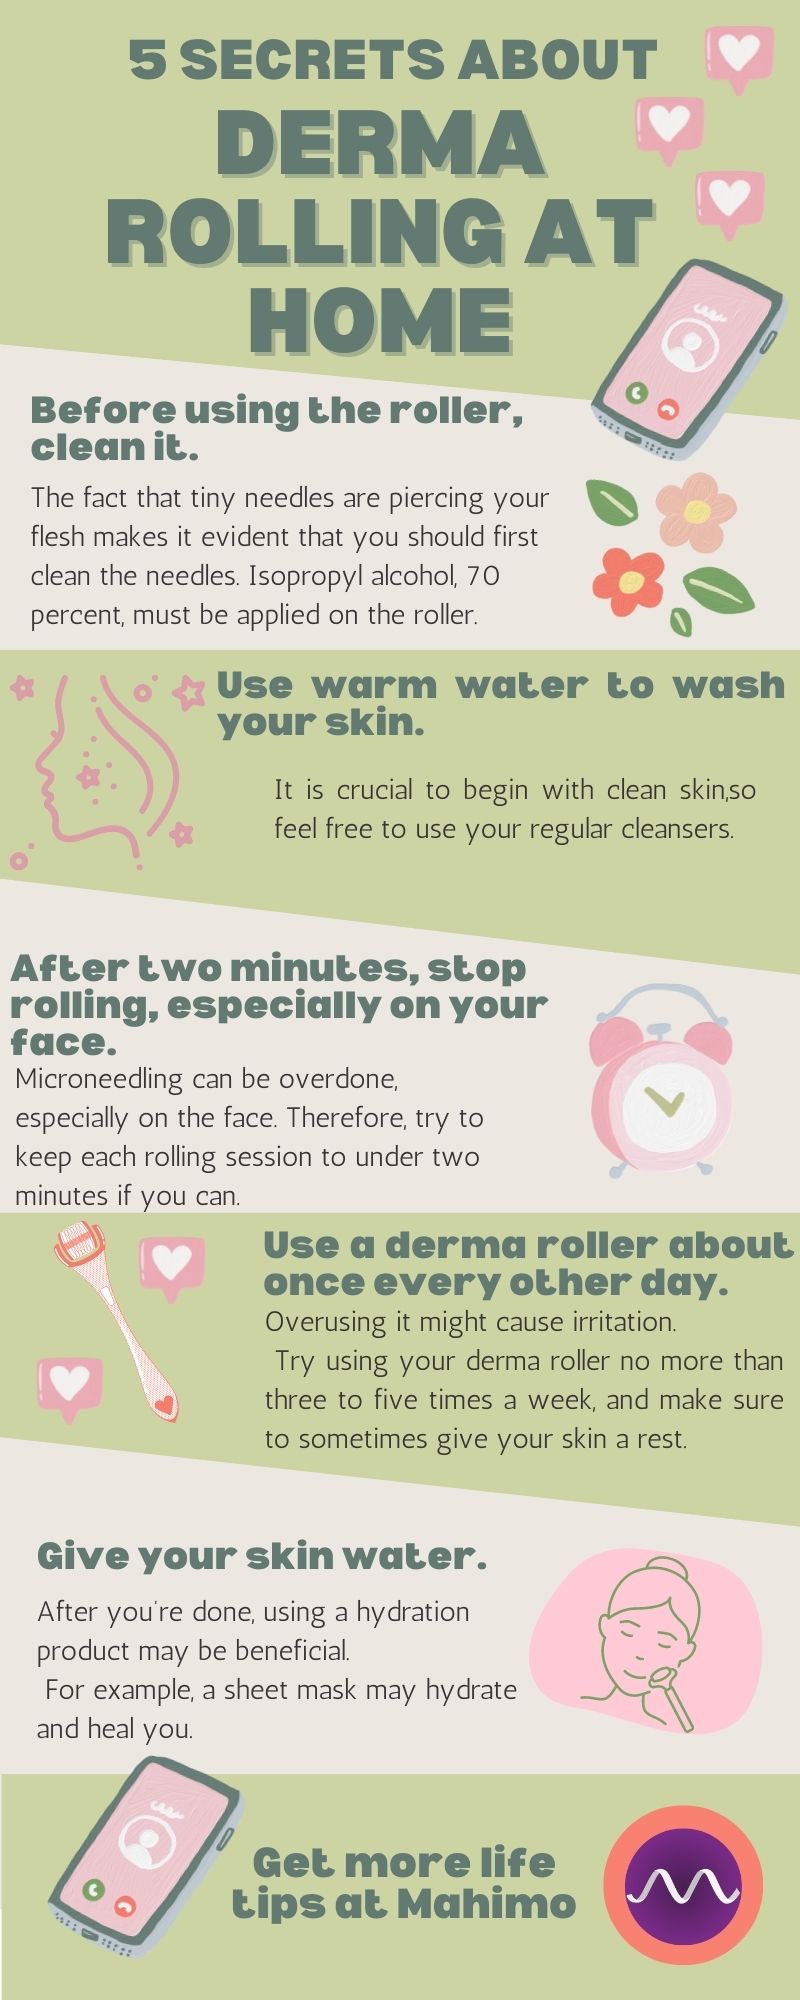 15 Secrets About Derma Rolling at Home